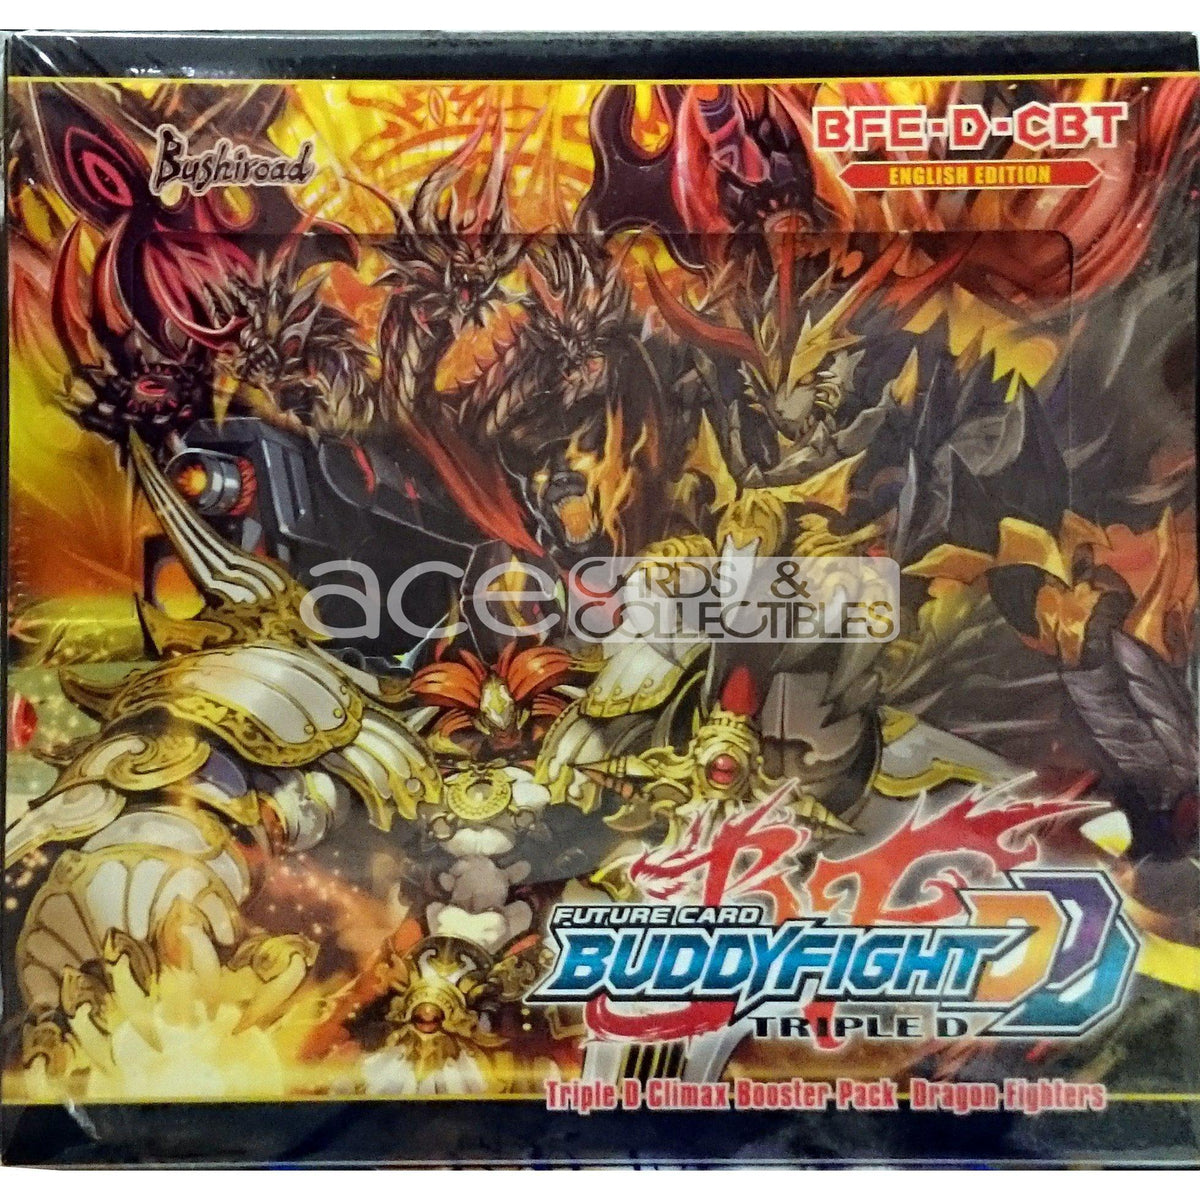 Future Card Buddyfight D Dragon Fighters [BFE-D-CBT] (English)-Booster Box (30packs)-Bushiroad-Ace Cards &amp; Collectibles